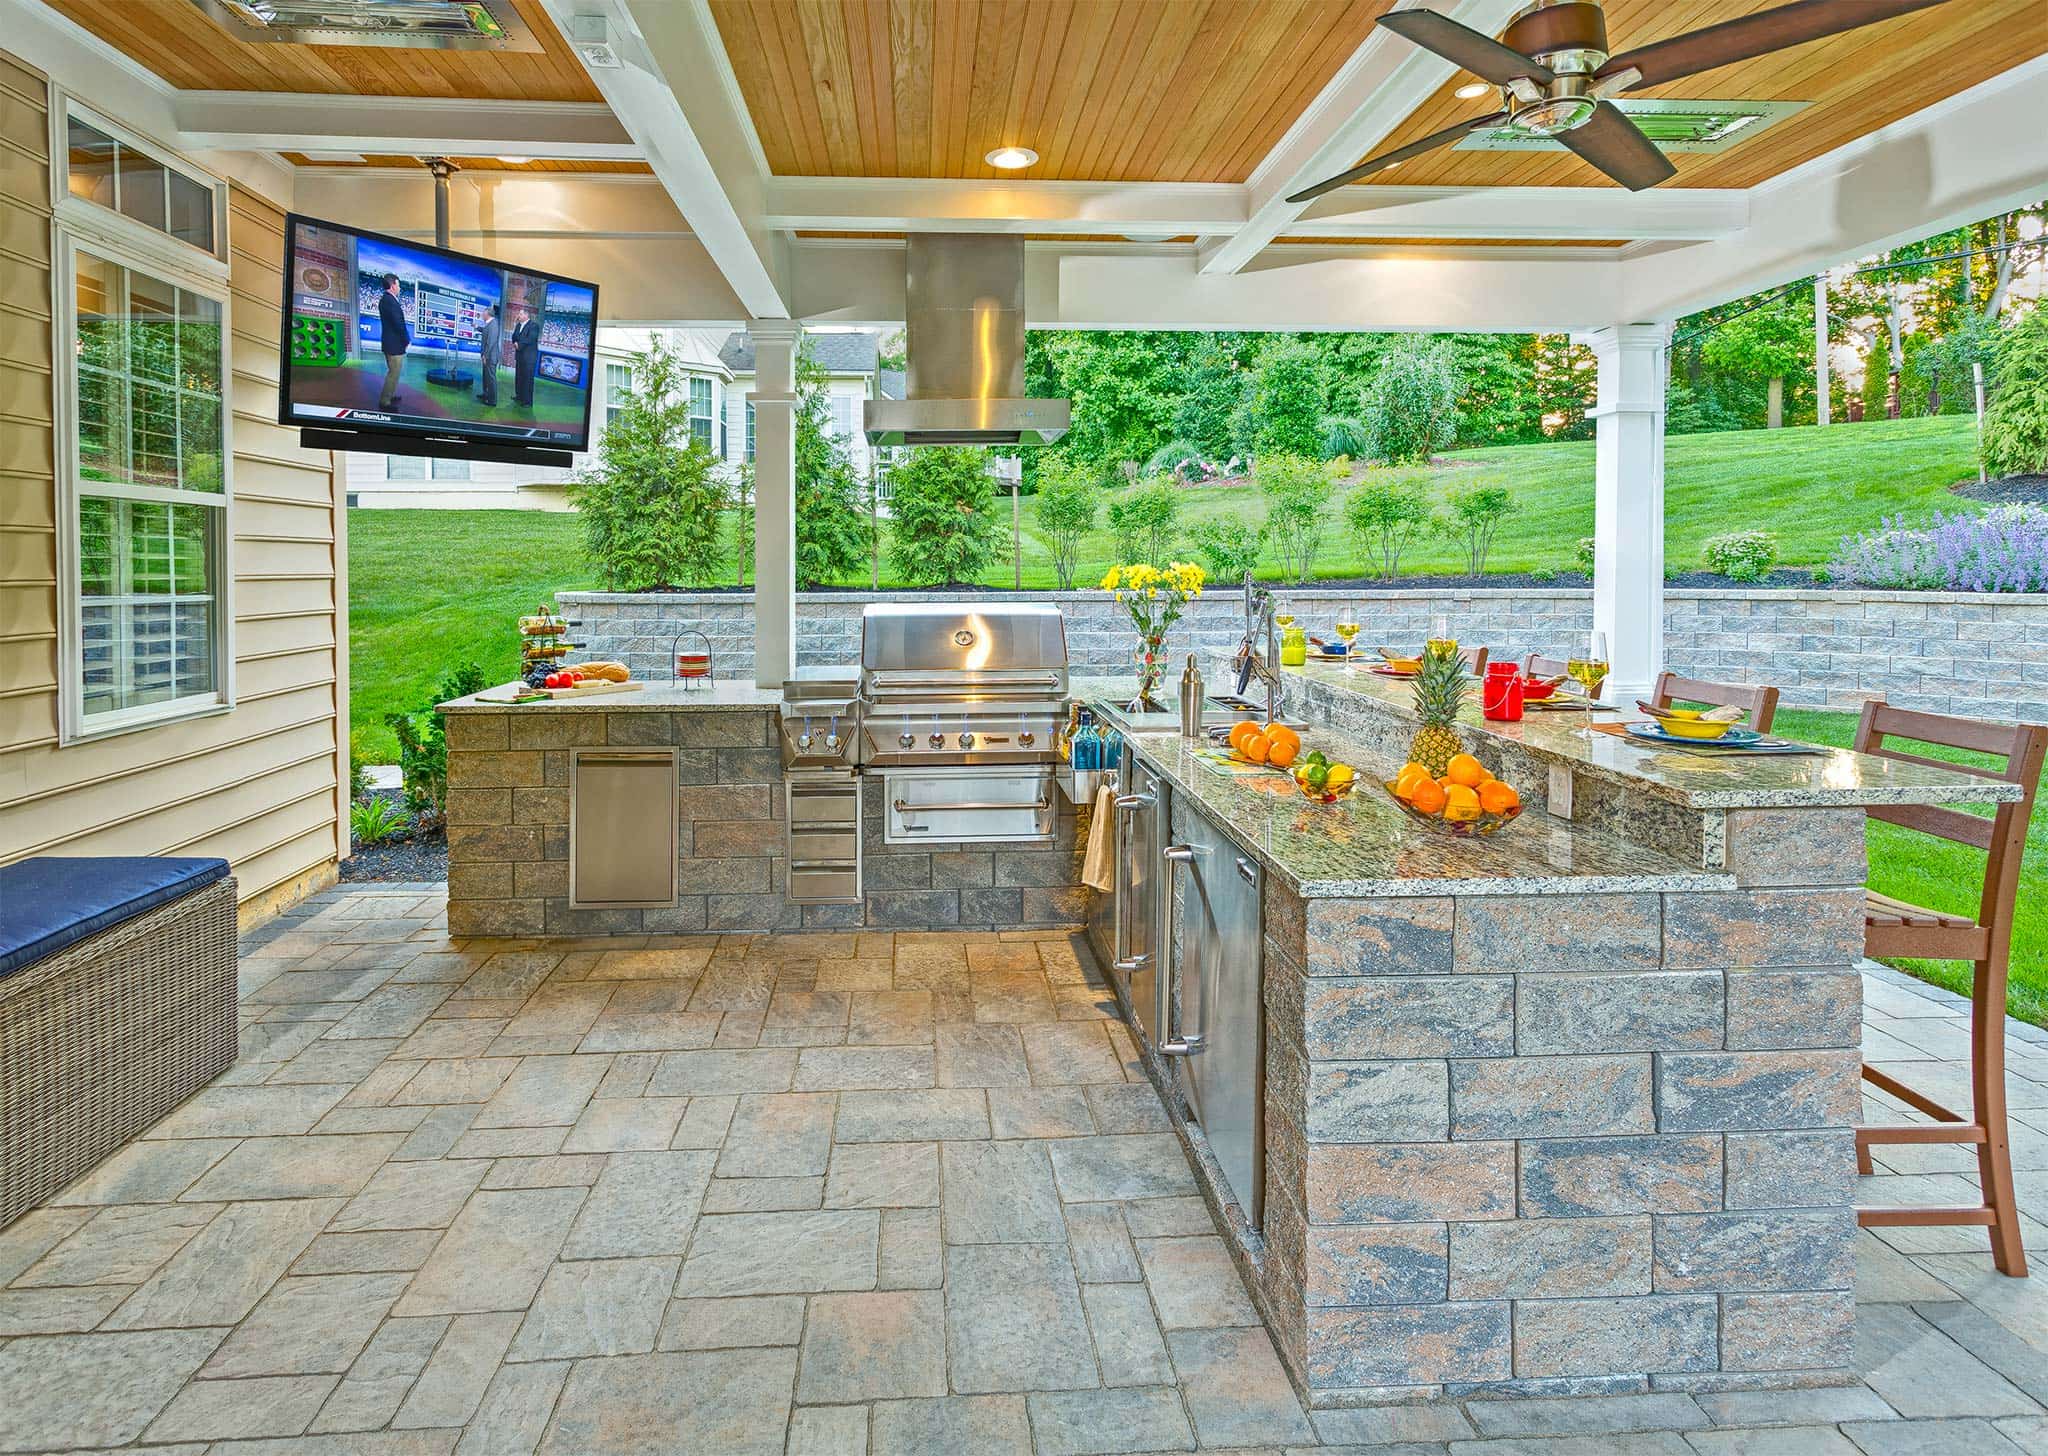 Outdoor Rooms - Outdoor Kitchens, Sunrooms, Living Rooms